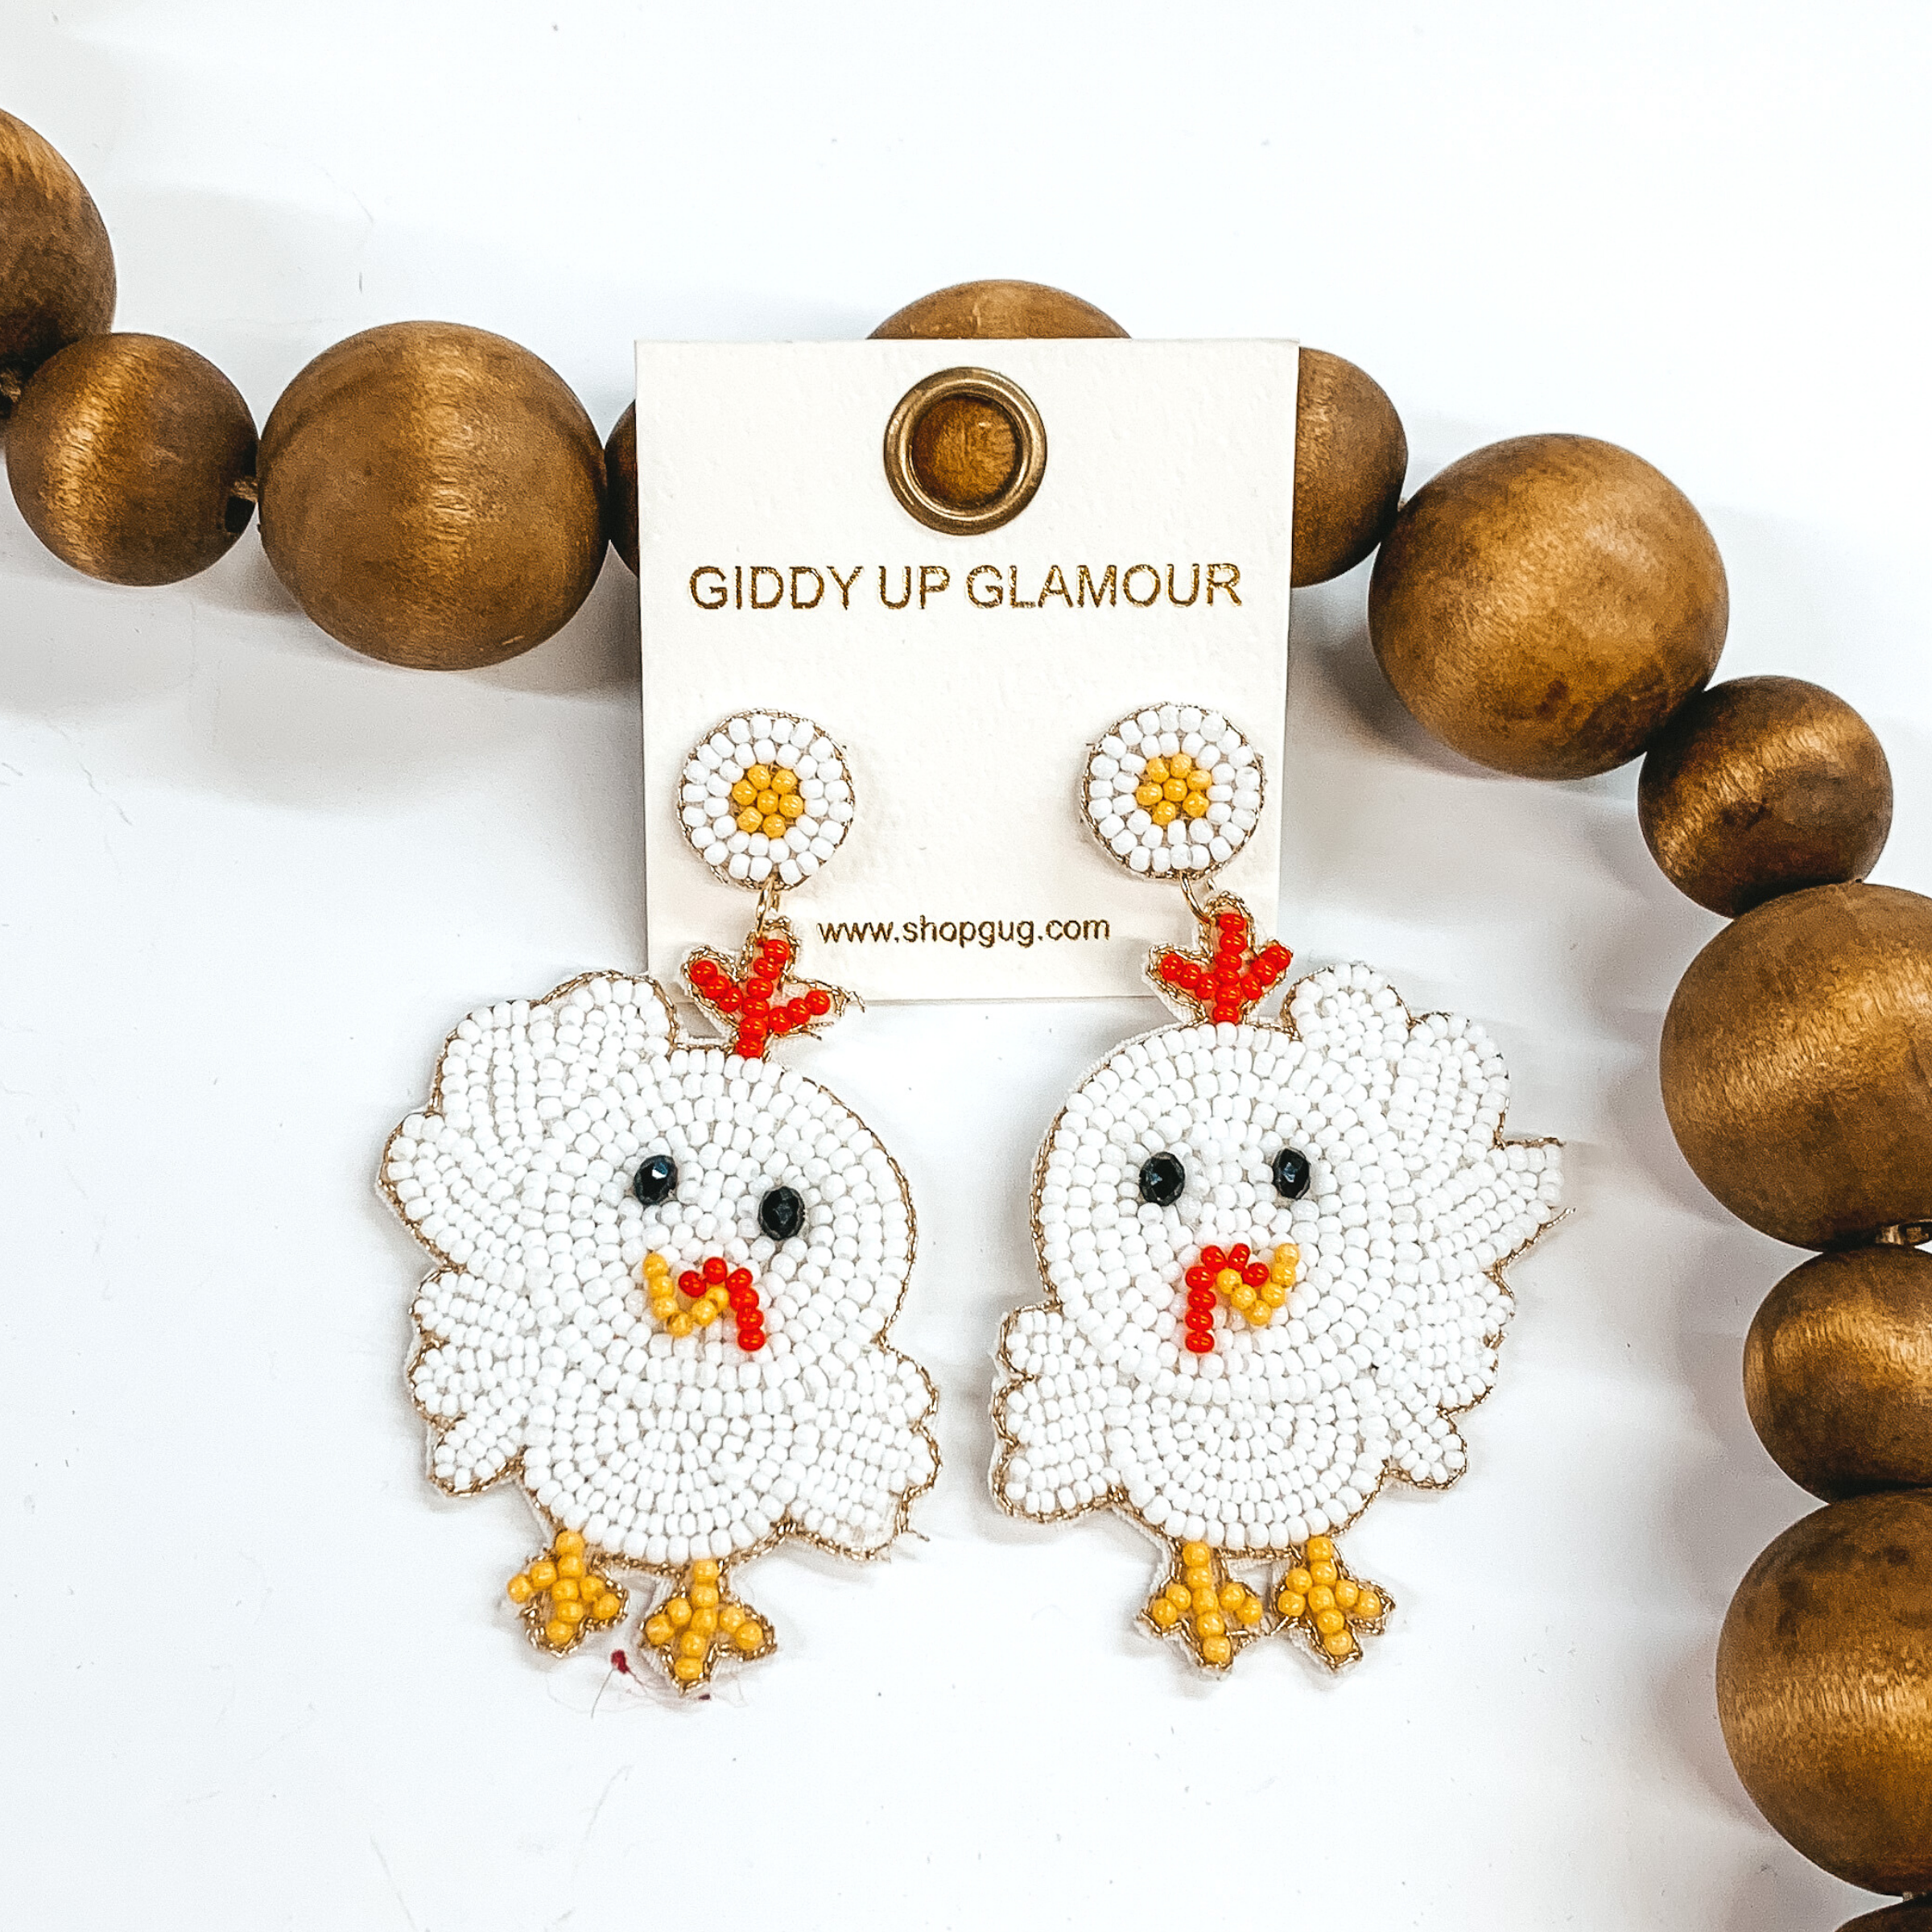 These are beaded chick shaped dangle earrings with a post back. These earrings are white with red and yellow detailing. These earrings are pictured on a white background with brown beads behind it.